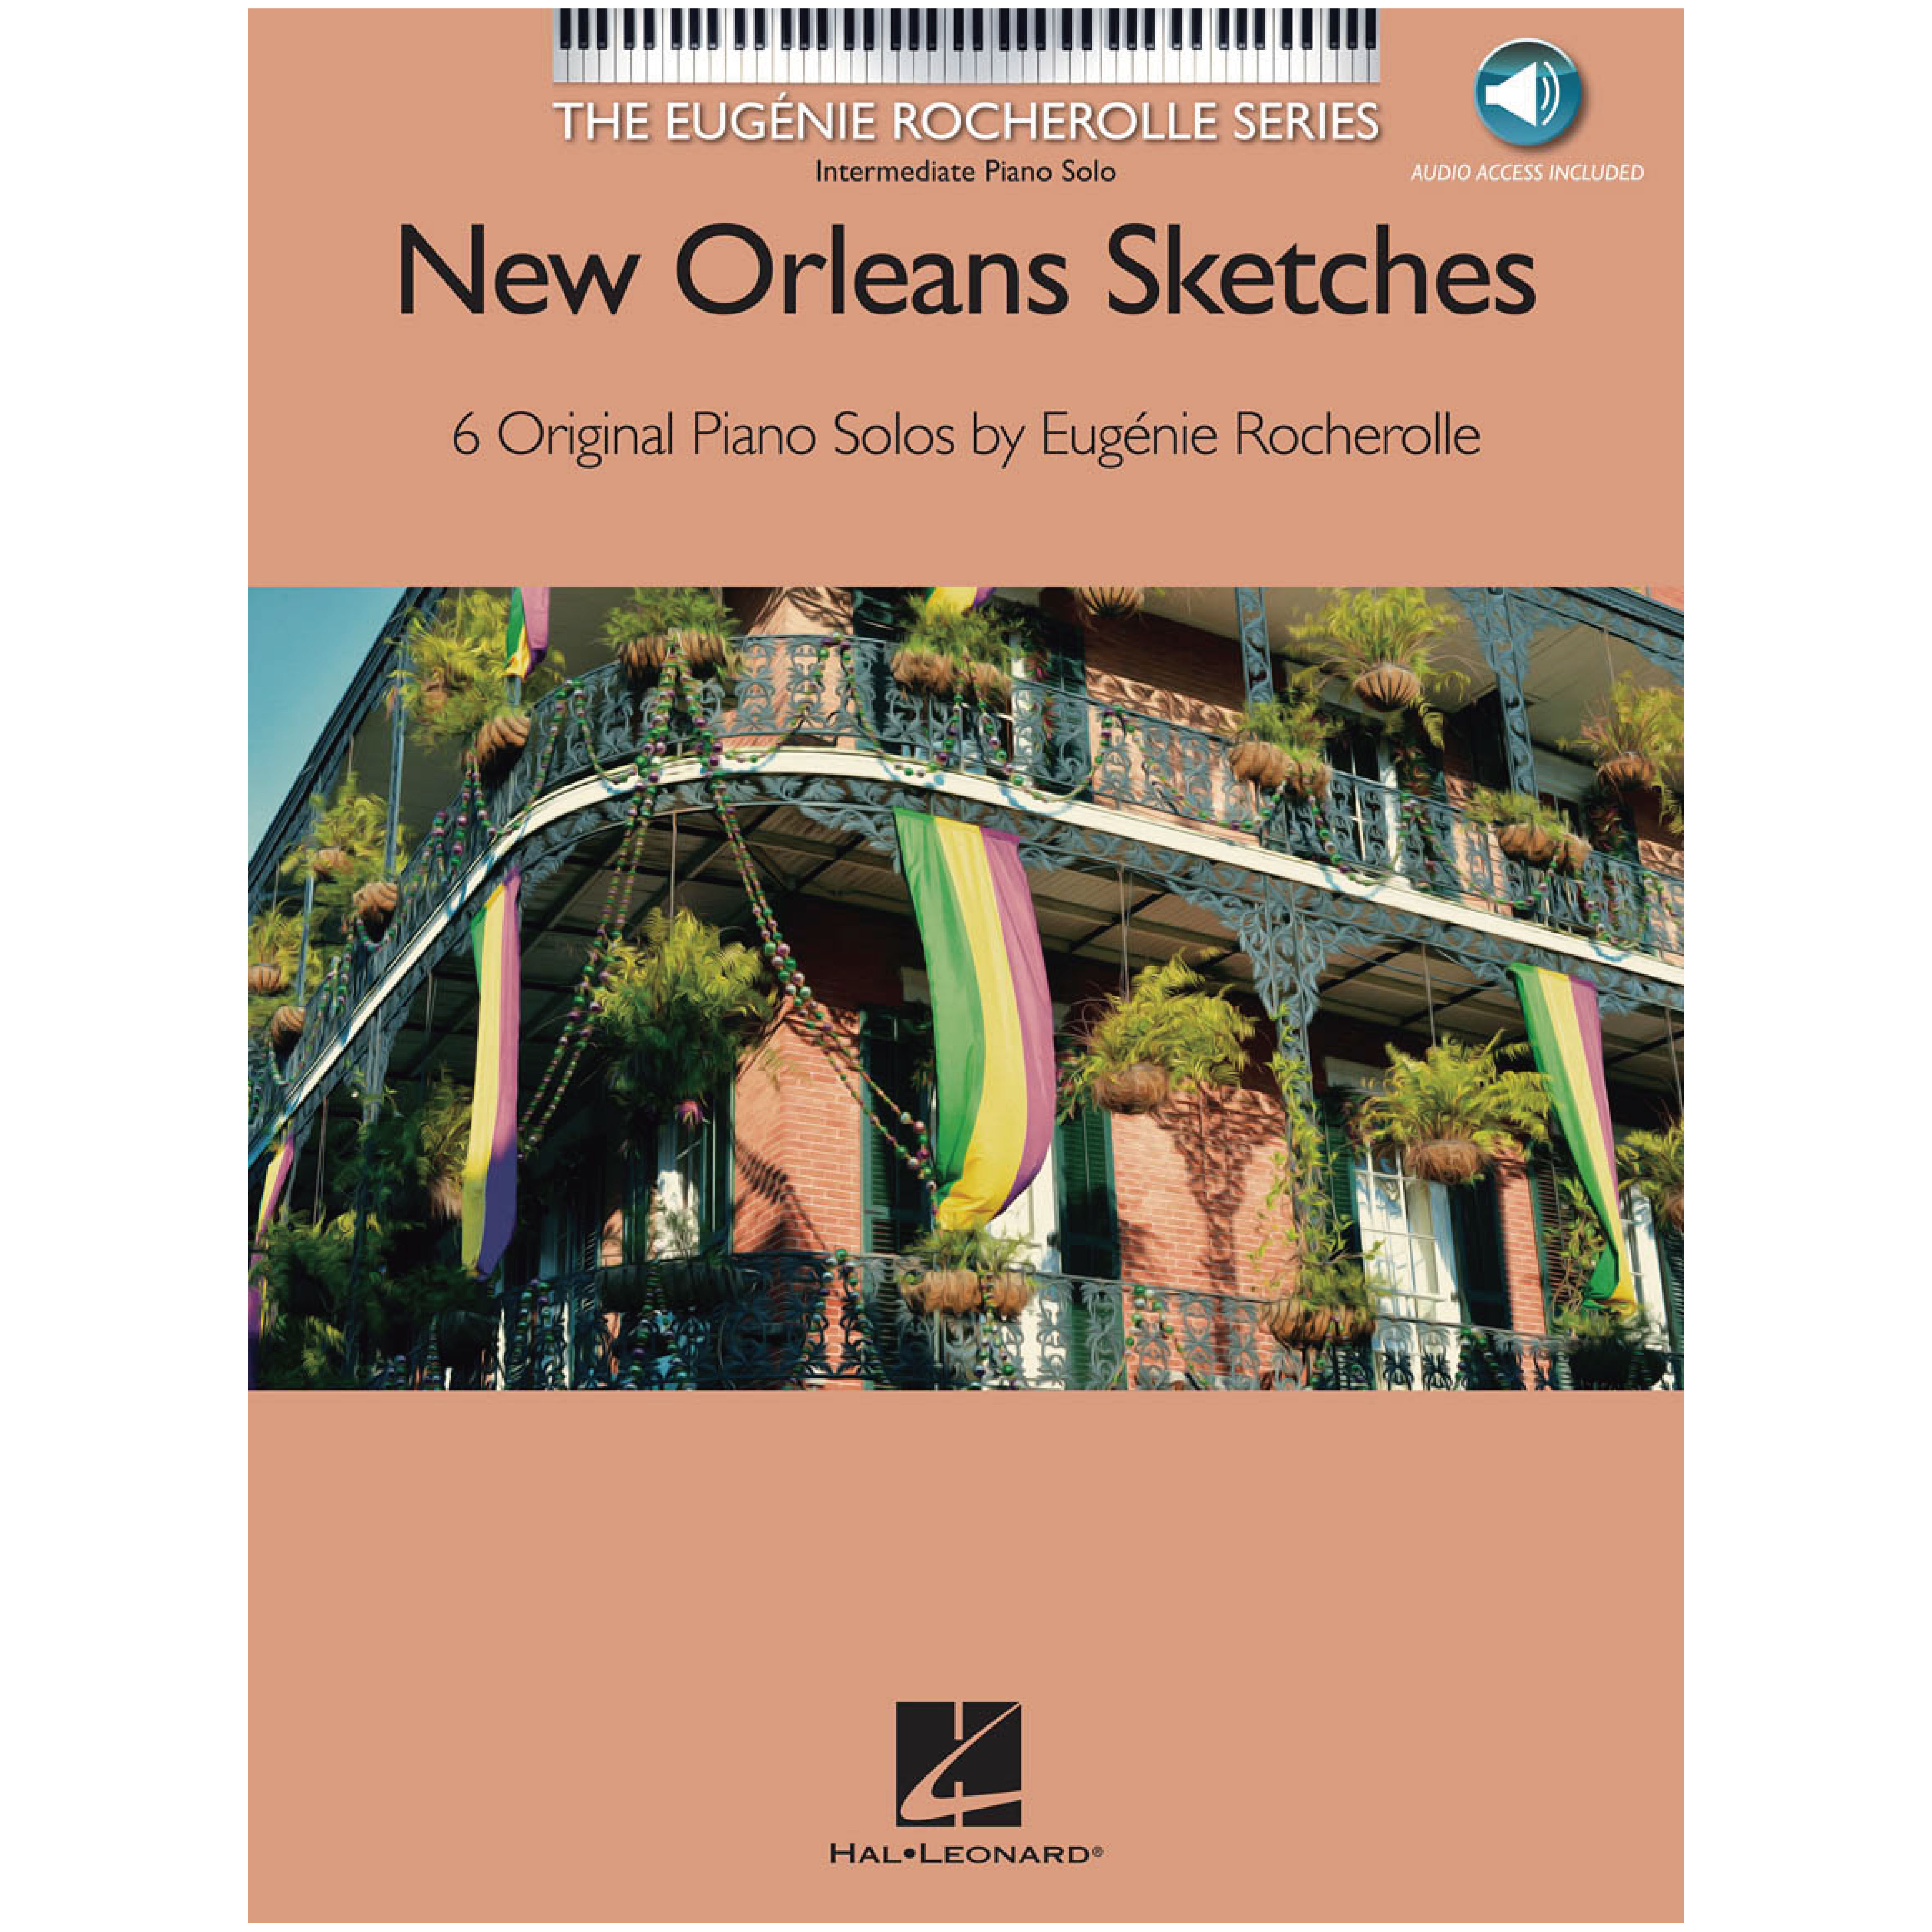 NEW ORLEANS SKETCHES